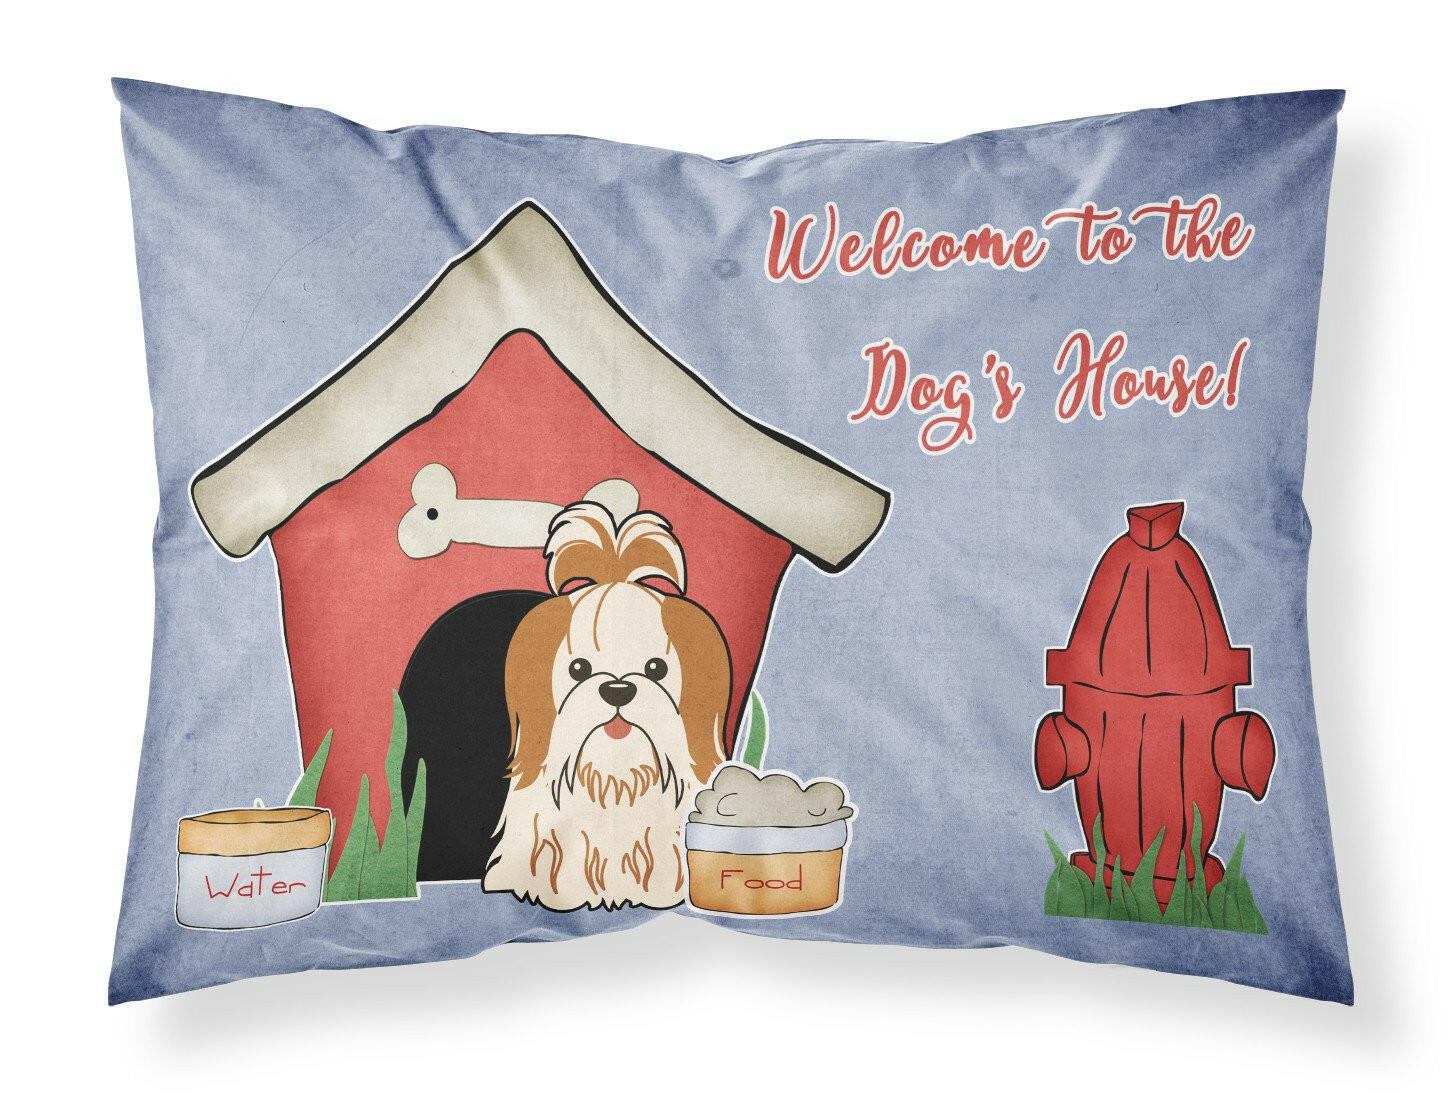 Dog House Collection Shih Tzu Red White Fabric Standard Pillowcase BB2841PILLOWCASE by Caroline's Treasures